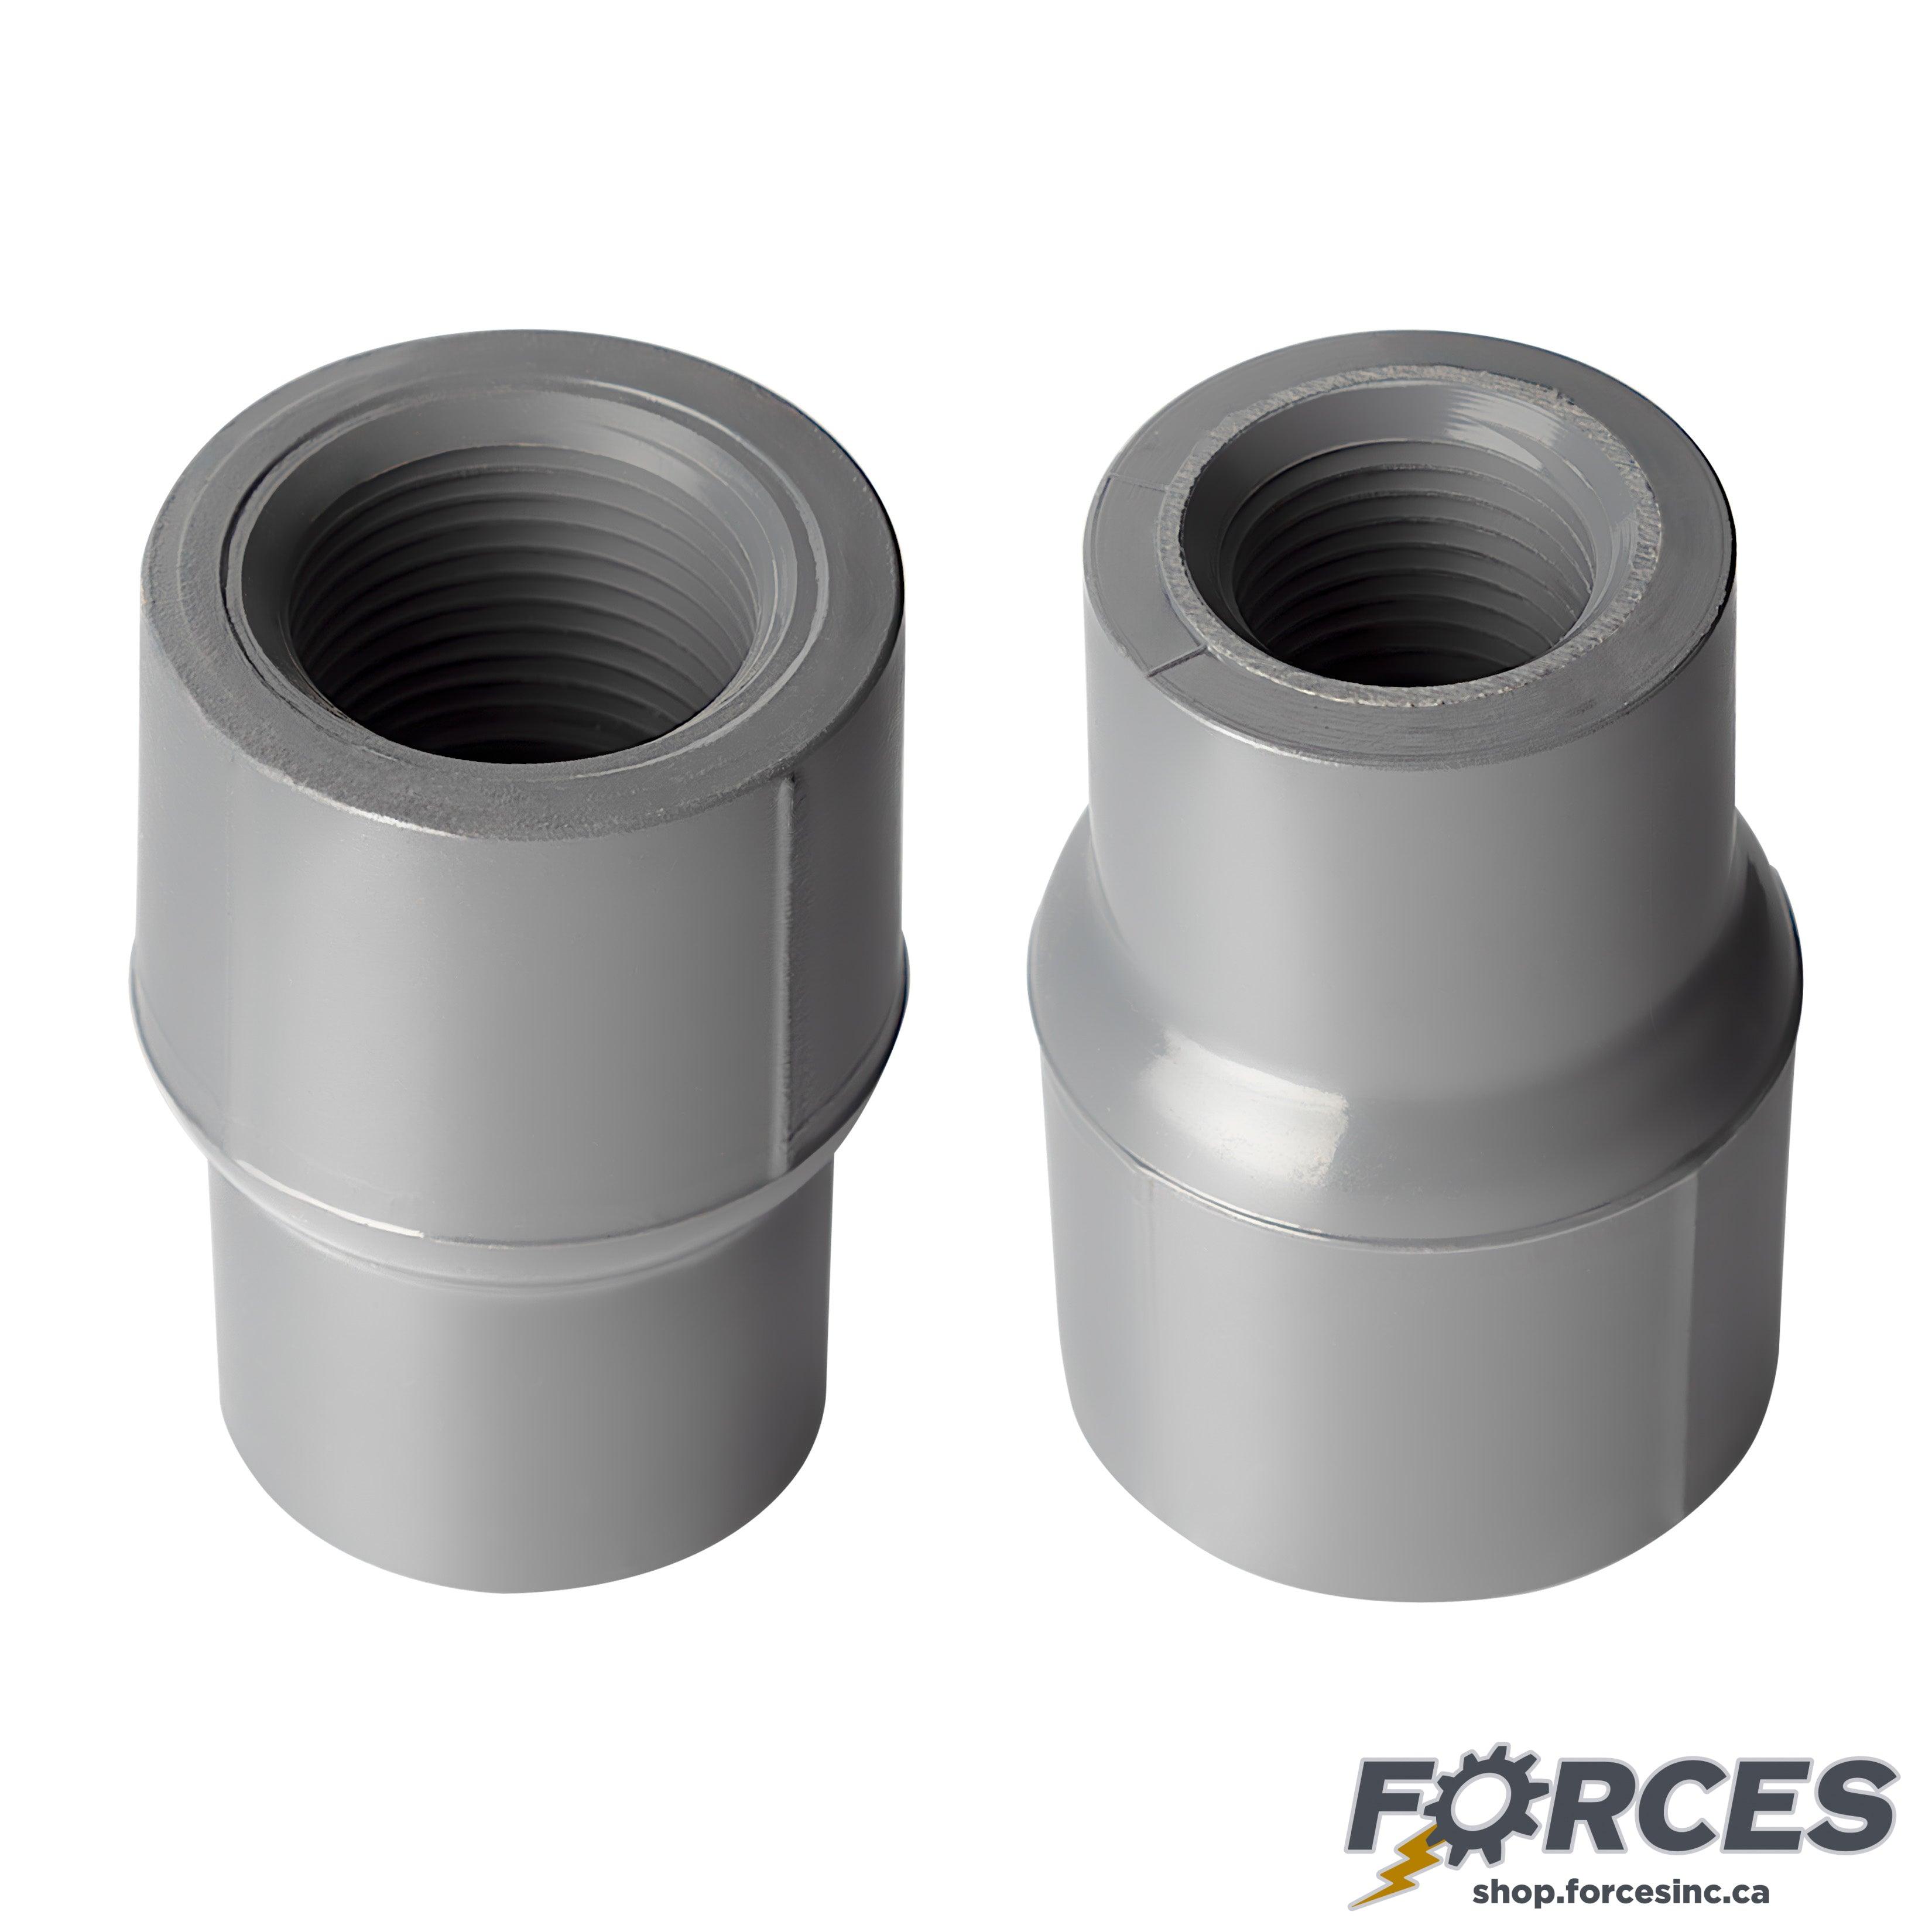 1-1/2" x 3/4" Reducing Coupling (Threaded) Sch 80 - PVC Grey | 830210 - Forces Inc